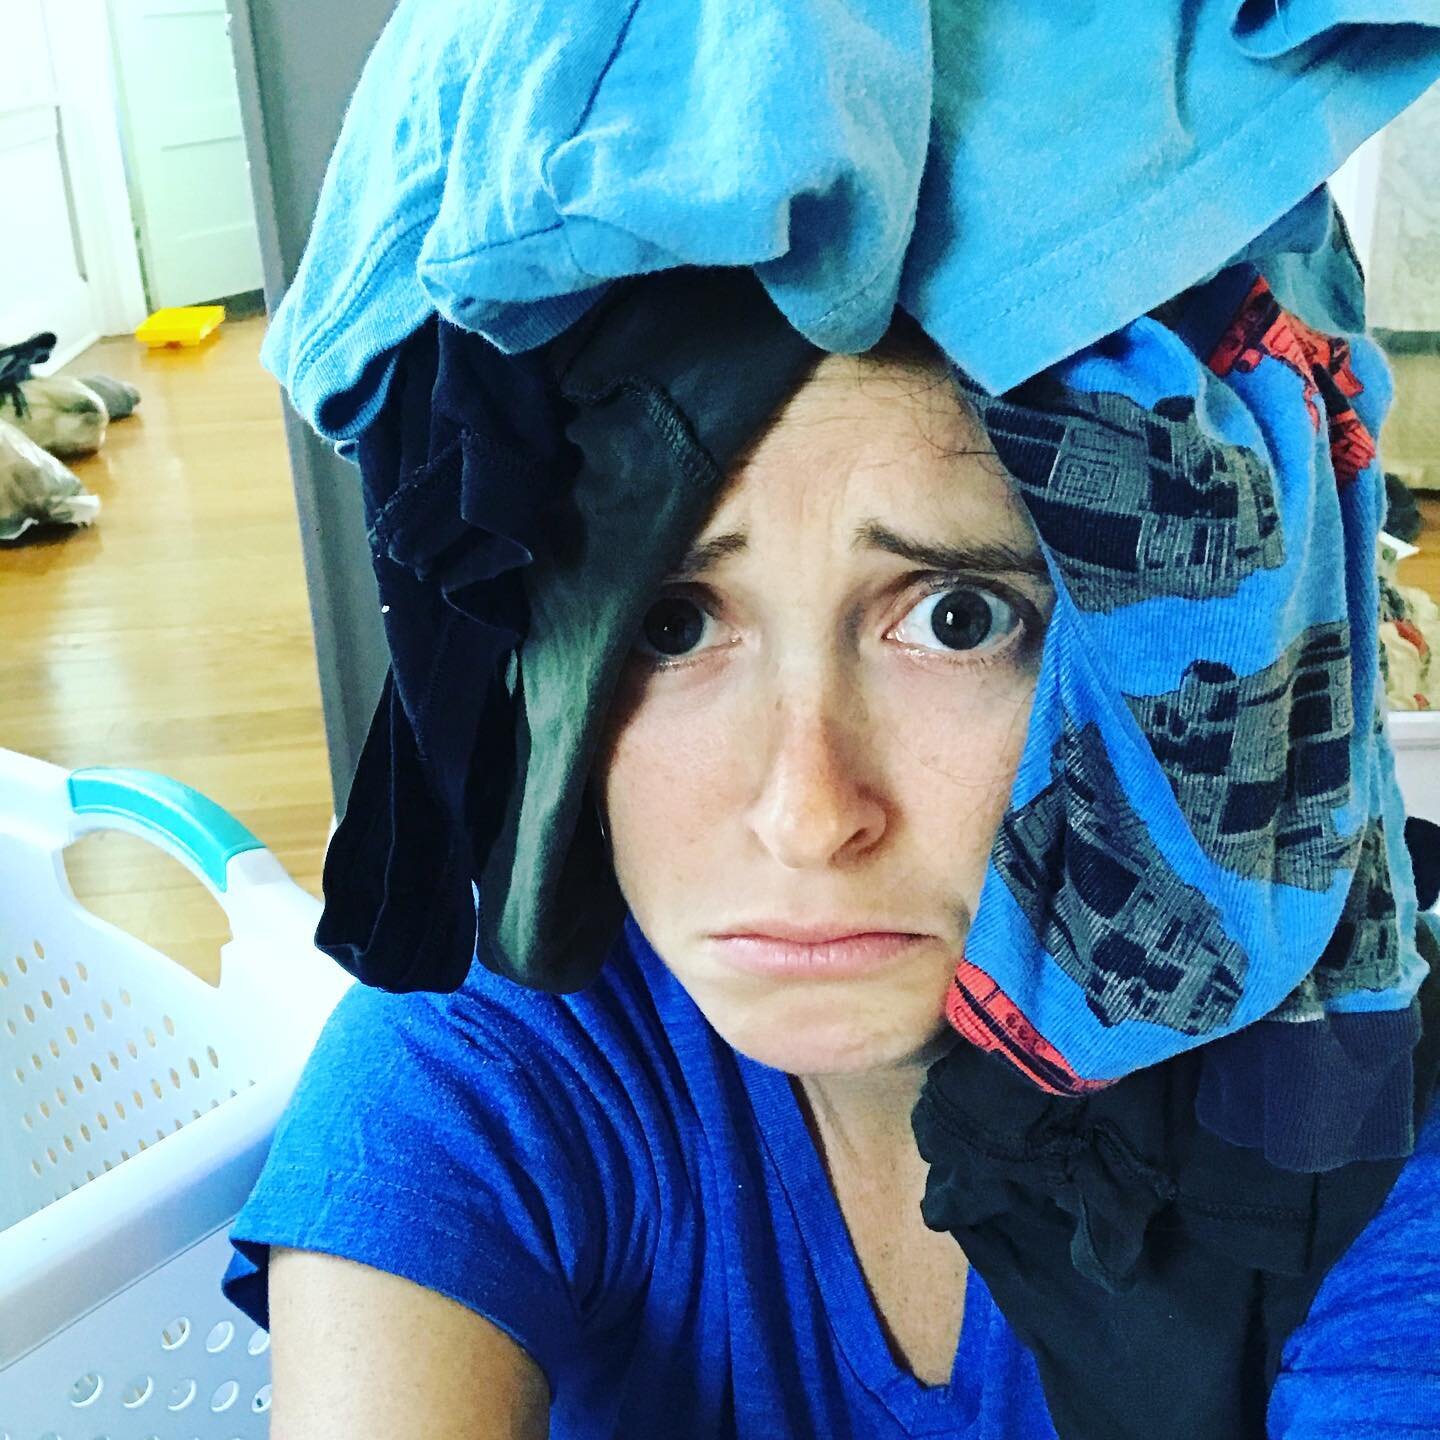 HA! Tricked ya. You thought I was gonna GIVE tips. Nope! I hope to GET tips!😂 HOW DO YOU MANAGE ALL THE CLOTHES?!??????? Tell me, mom people. Show me your ways. Do you get rid of 3/4 of them? That&rsquo;s what I&rsquo;m thinking.....